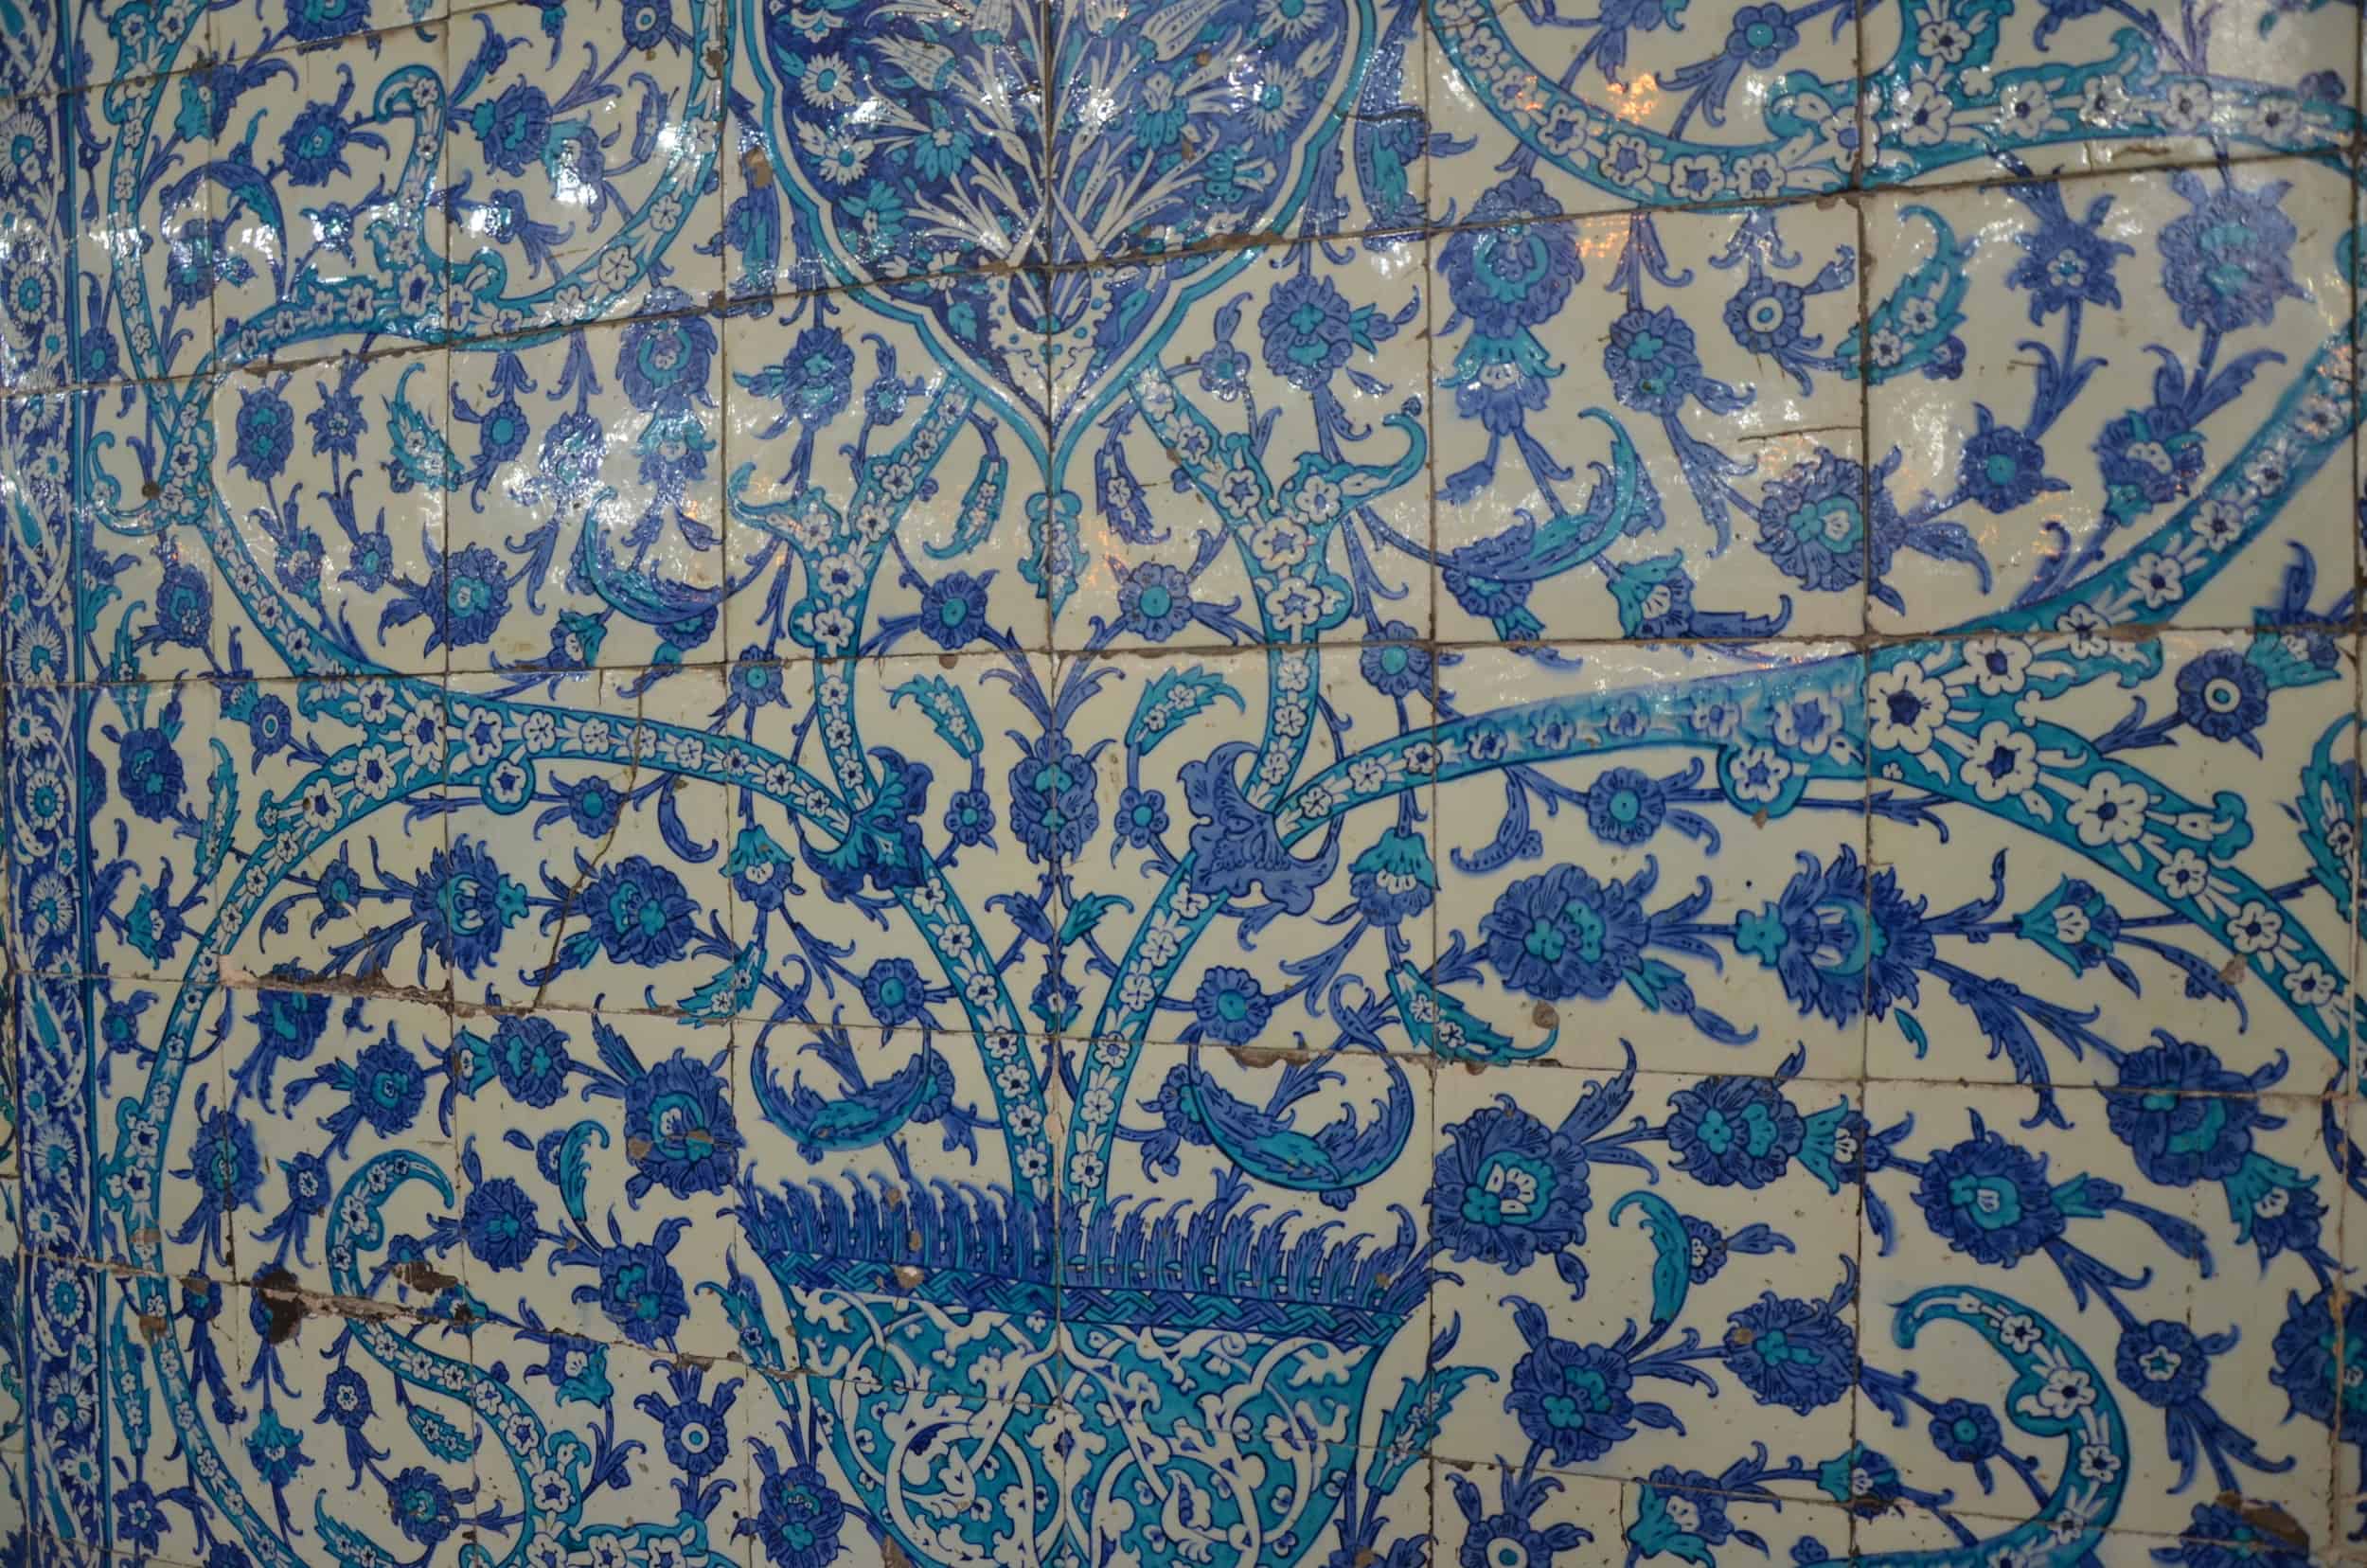 Iznik tiles at the tomb of Turhan Hatice Sultan